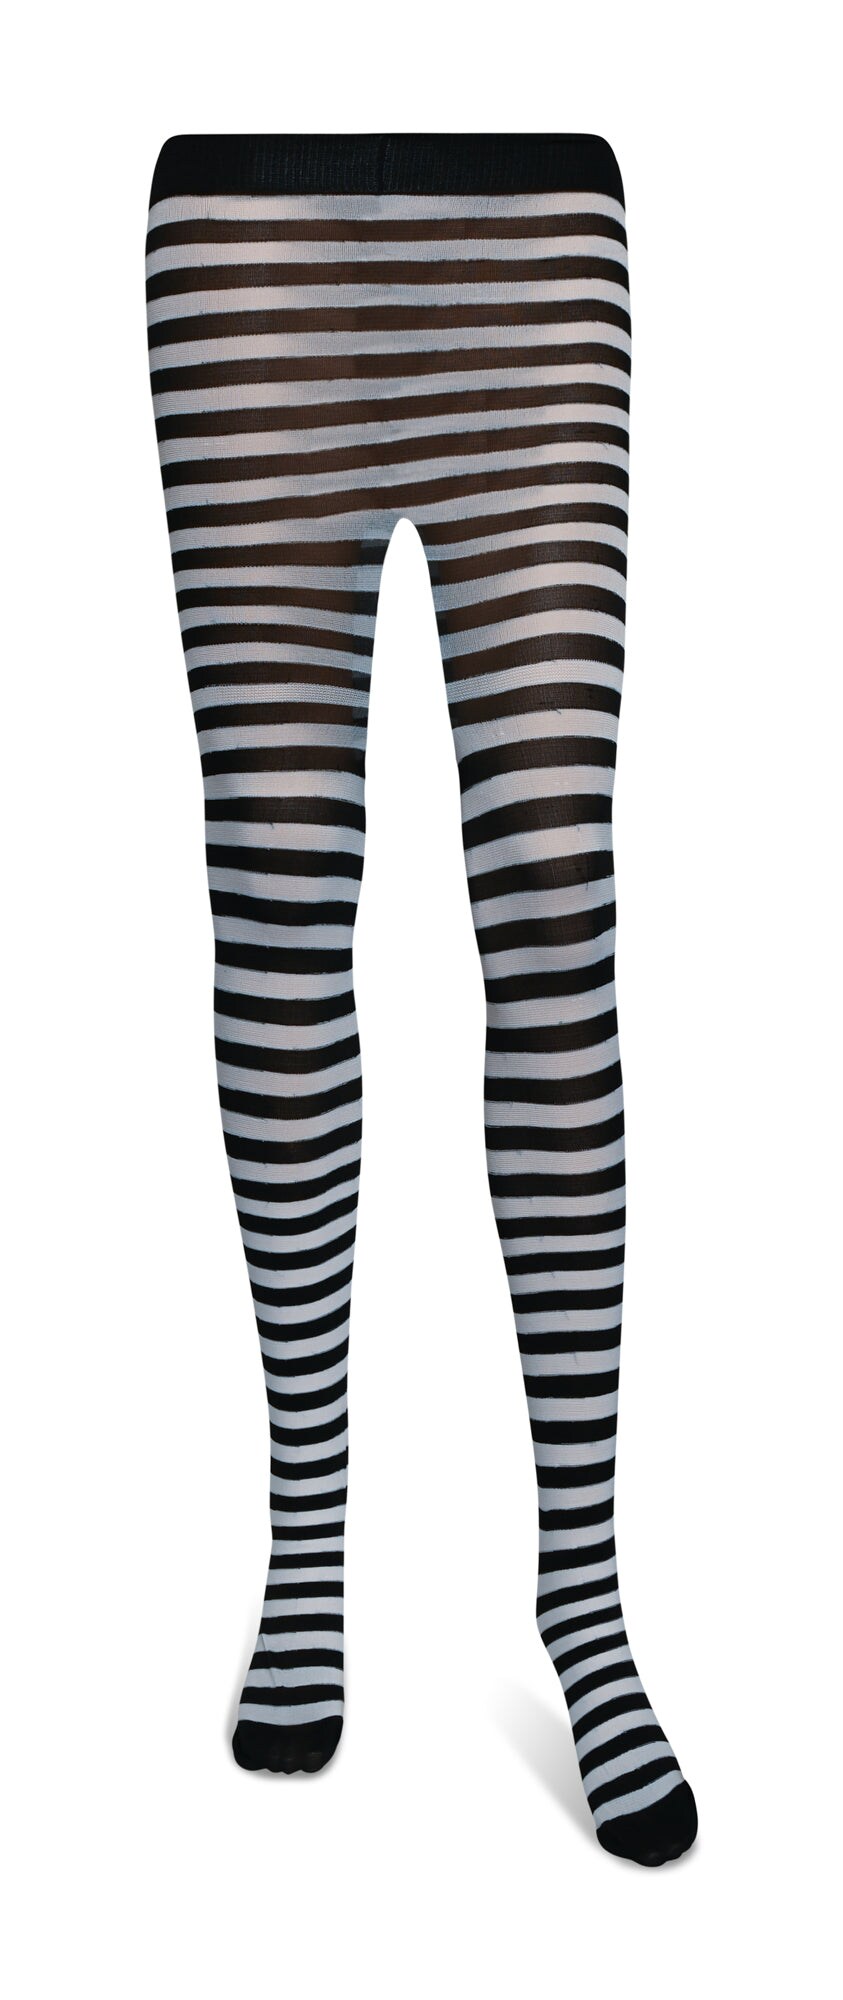 Black and White Tights - Striped Nylon Stretch Pantyhose Stocking  Accessories for Every Day Attire and Costumes for Teens and Children